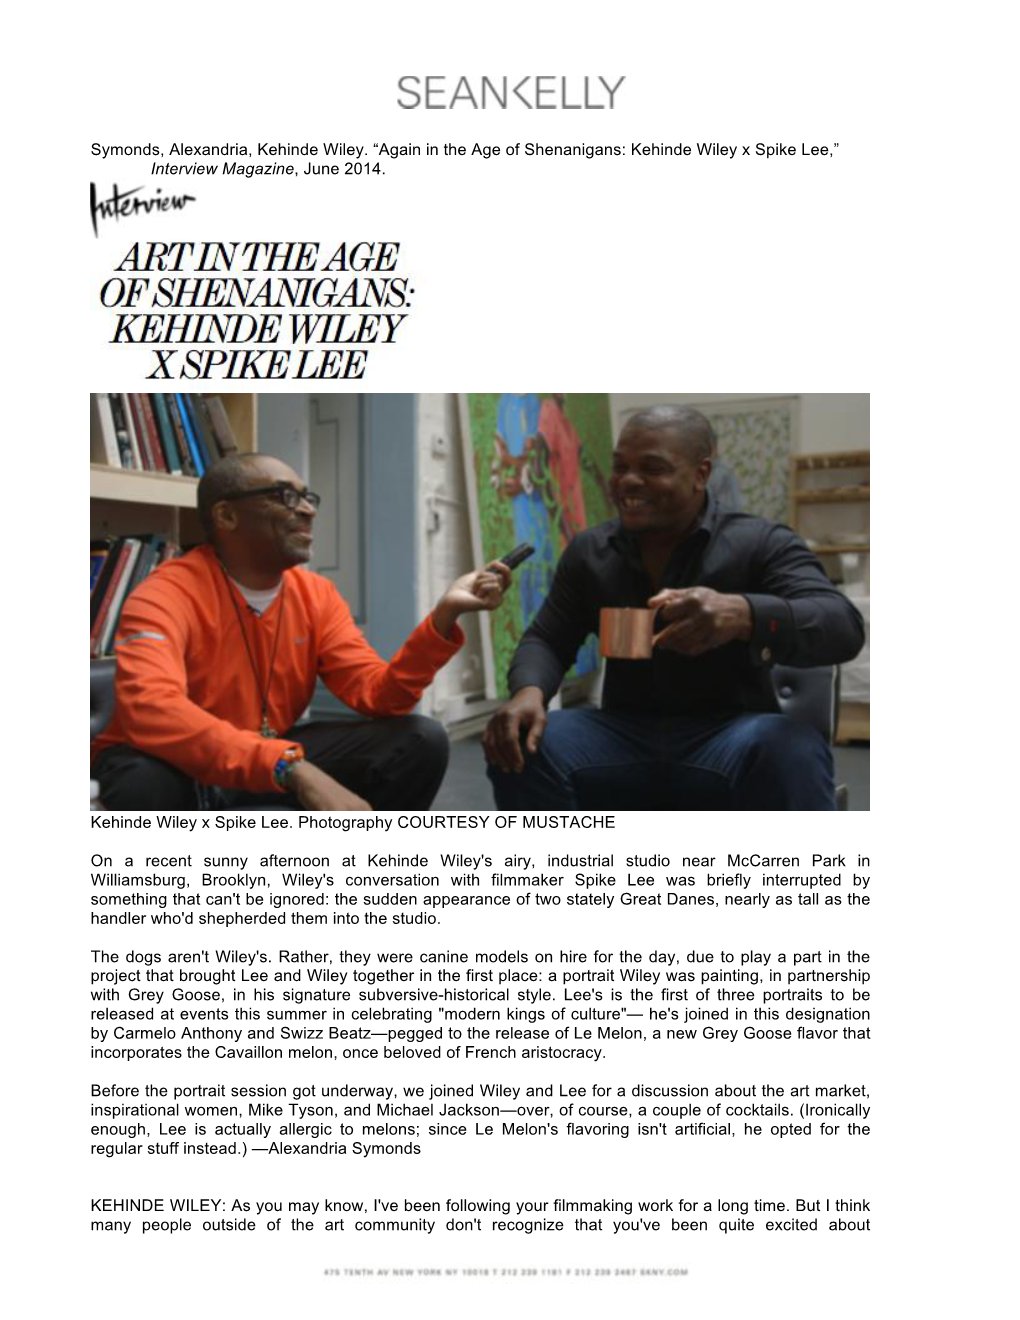 Again in the Age of Shenanigans: Kehinde Wiley X Spike Lee,” Interview Magazine, June 2014